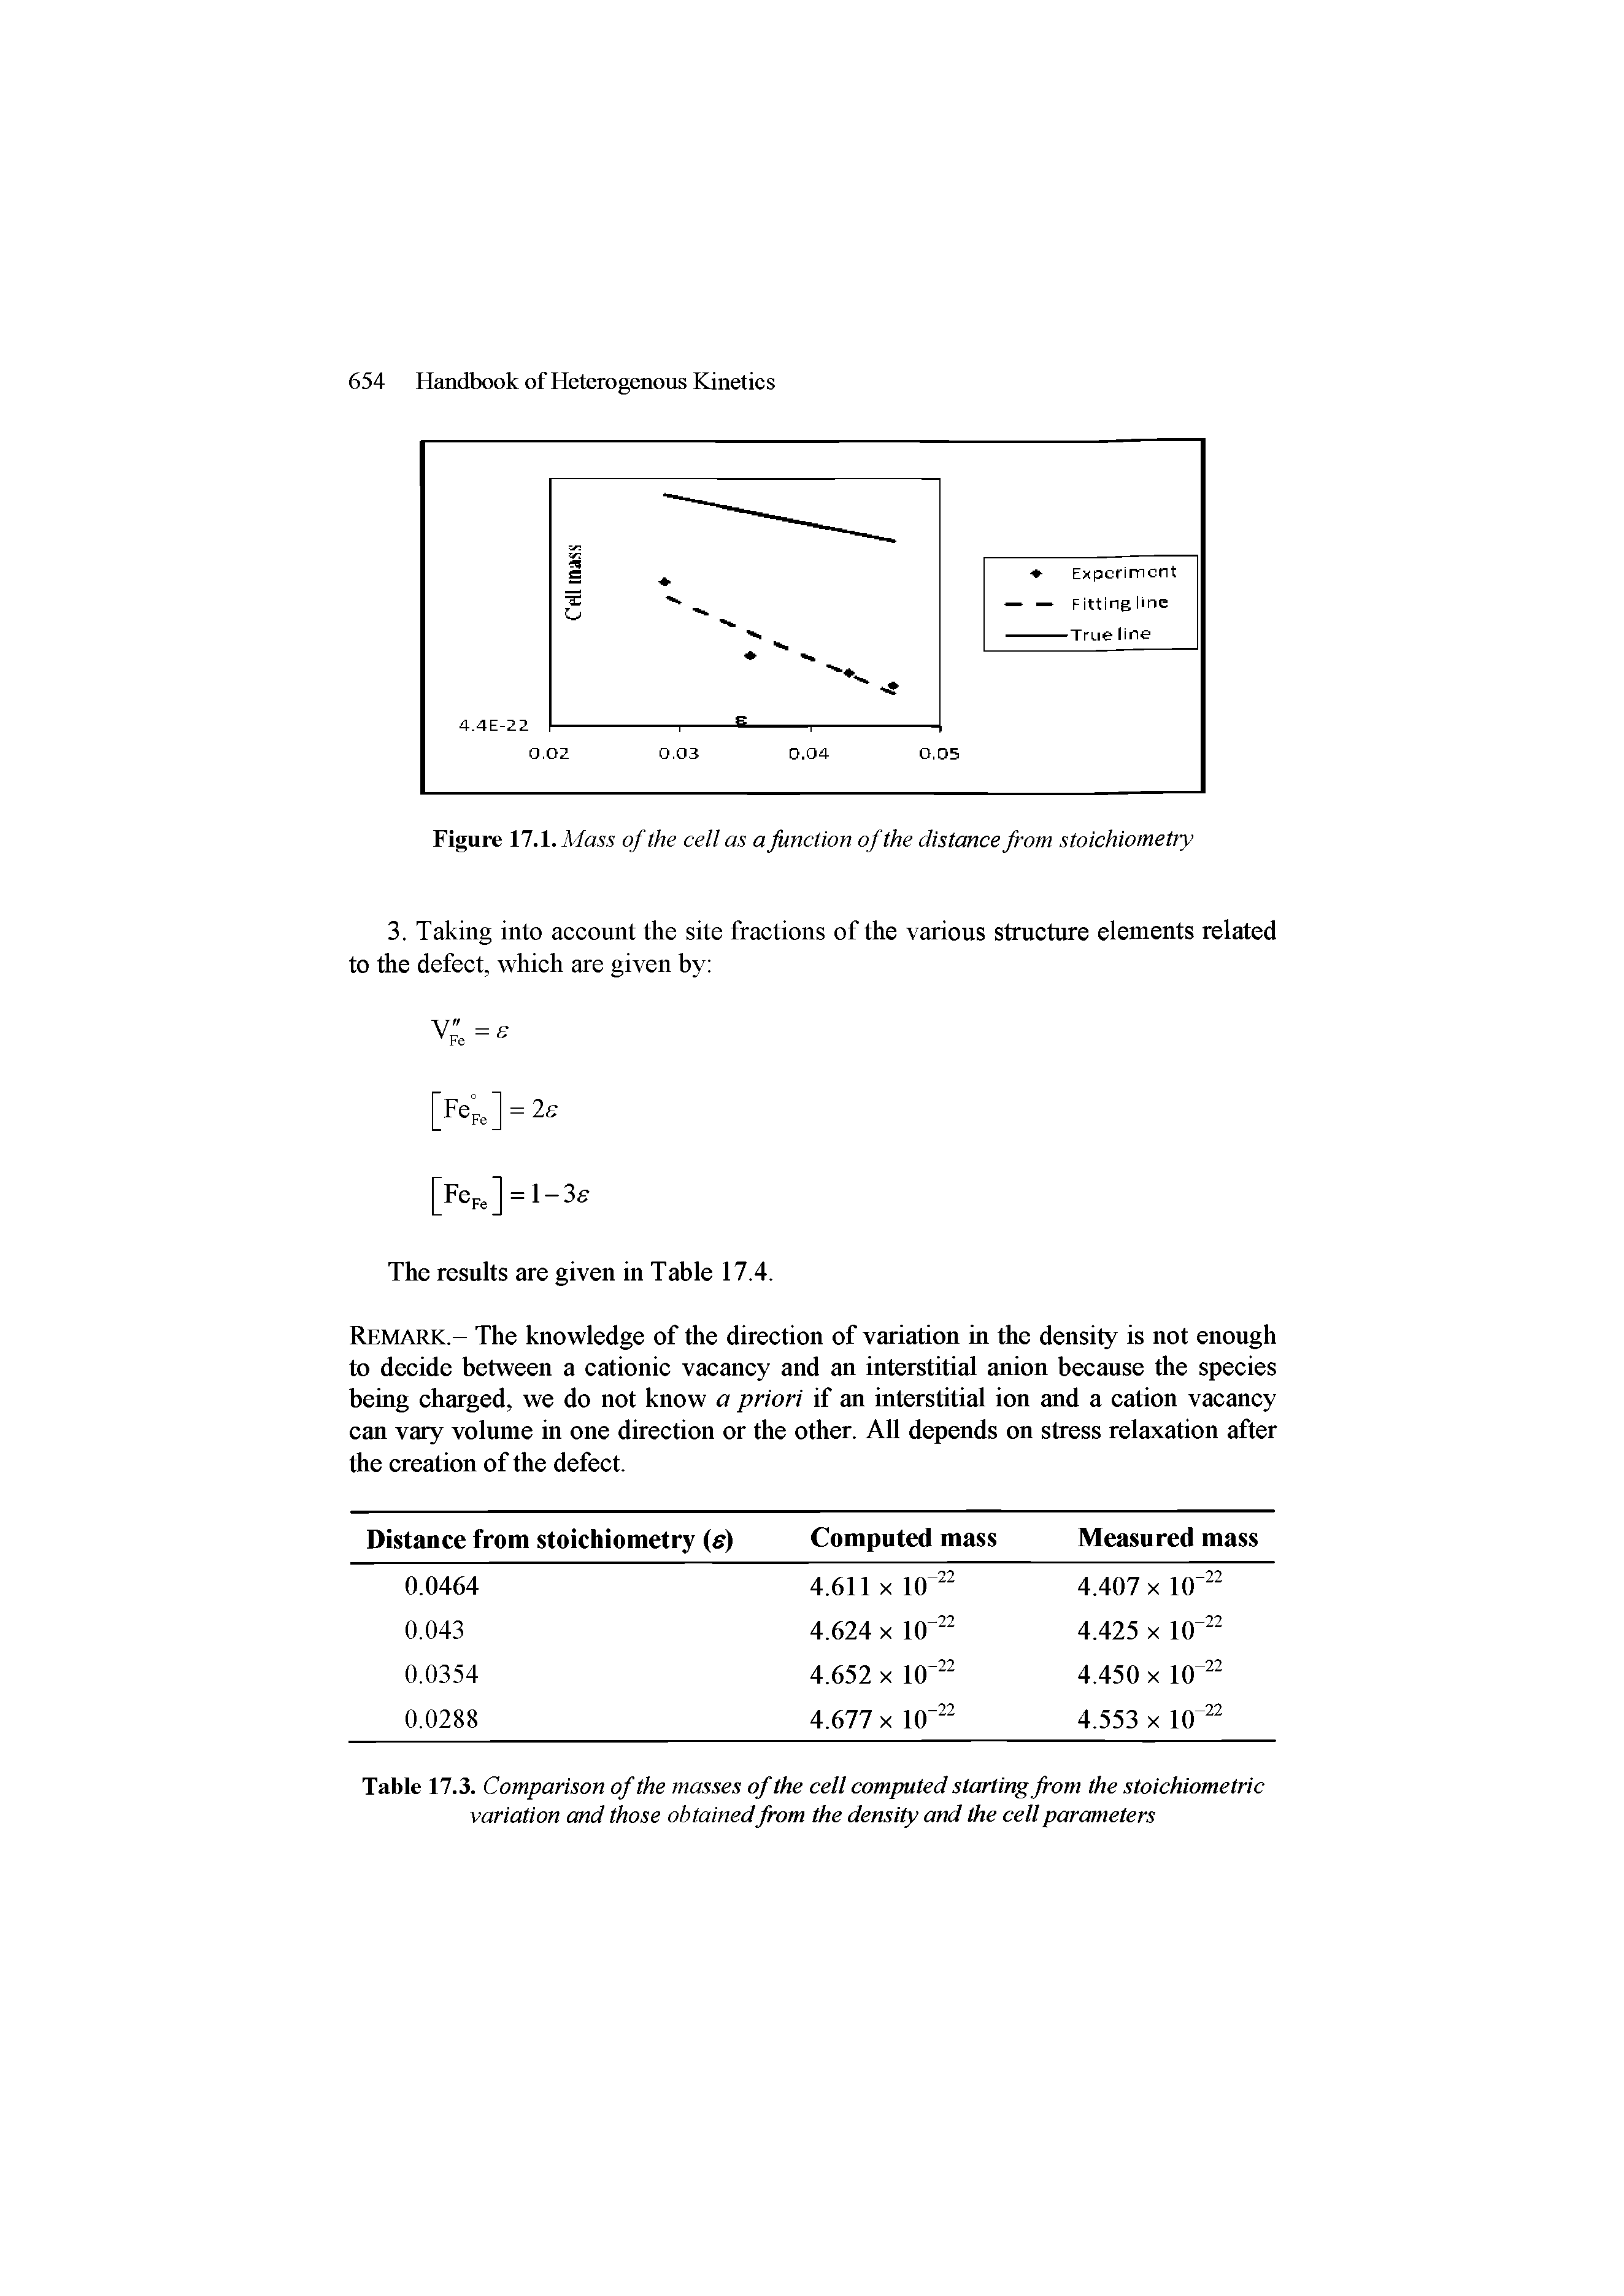 Table 17.3. Comparison of the masses of the cell computed starting from the stoichiometric variation and those obtainedfrom the density and the cell parameters...